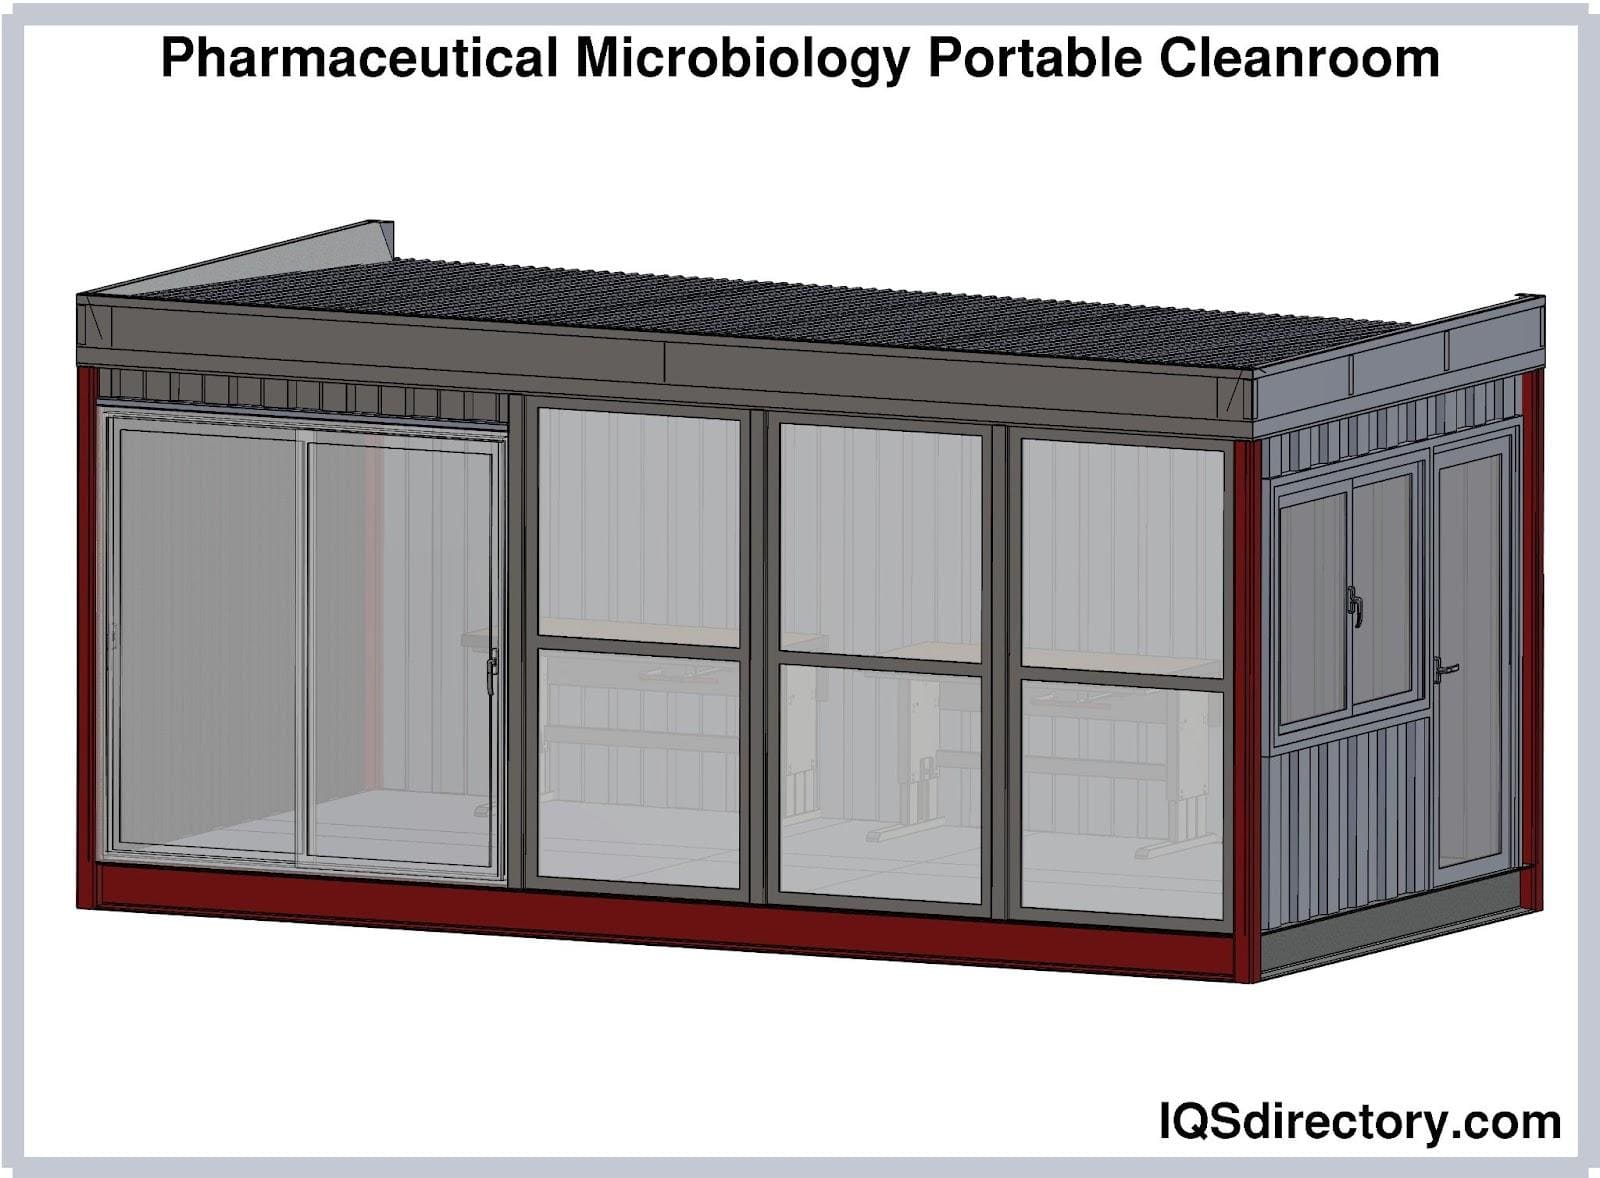 pharmaceutical microbiology portable cleanroom